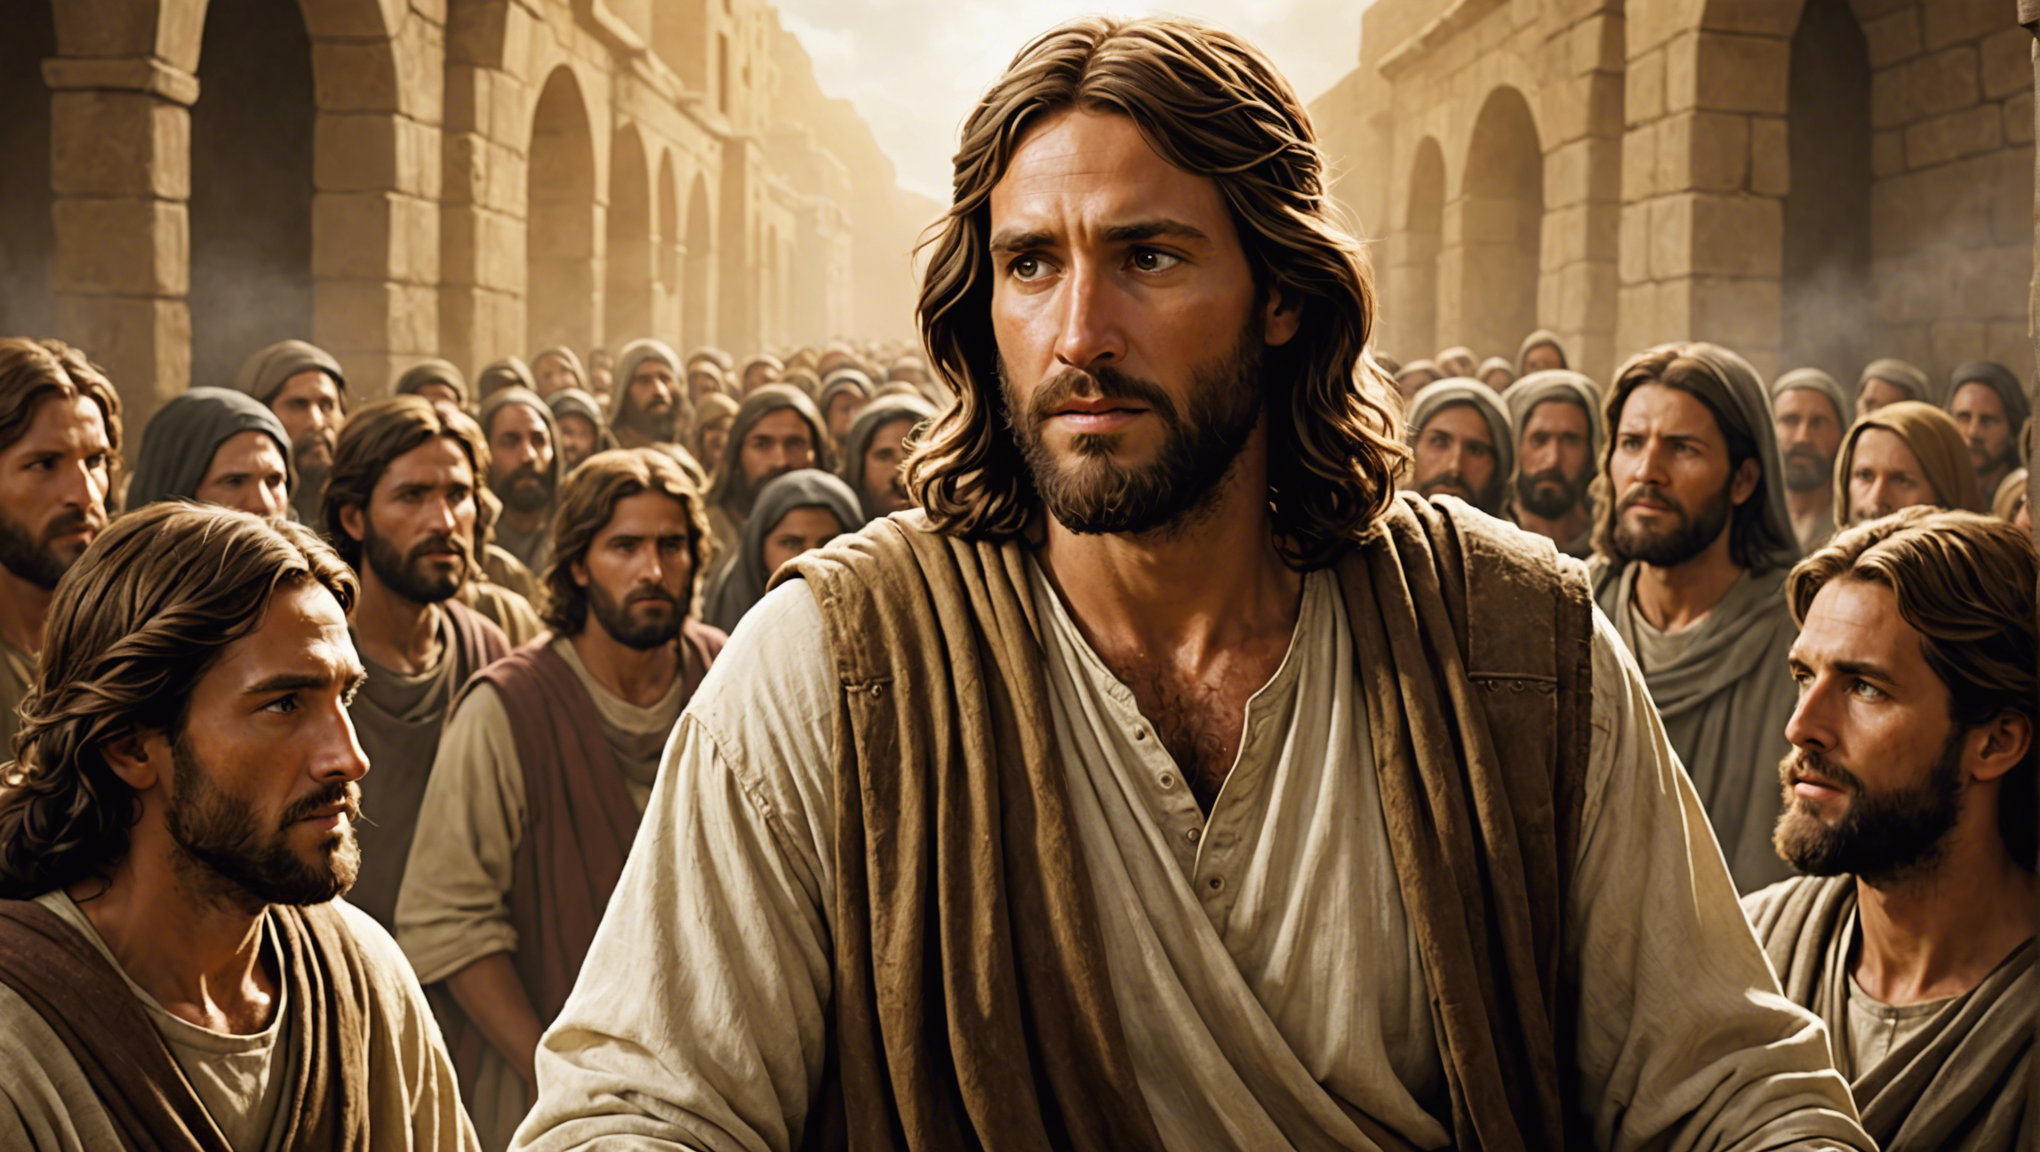 explore the significance of the miracles performed by jesus and understand their importance in history and faith.